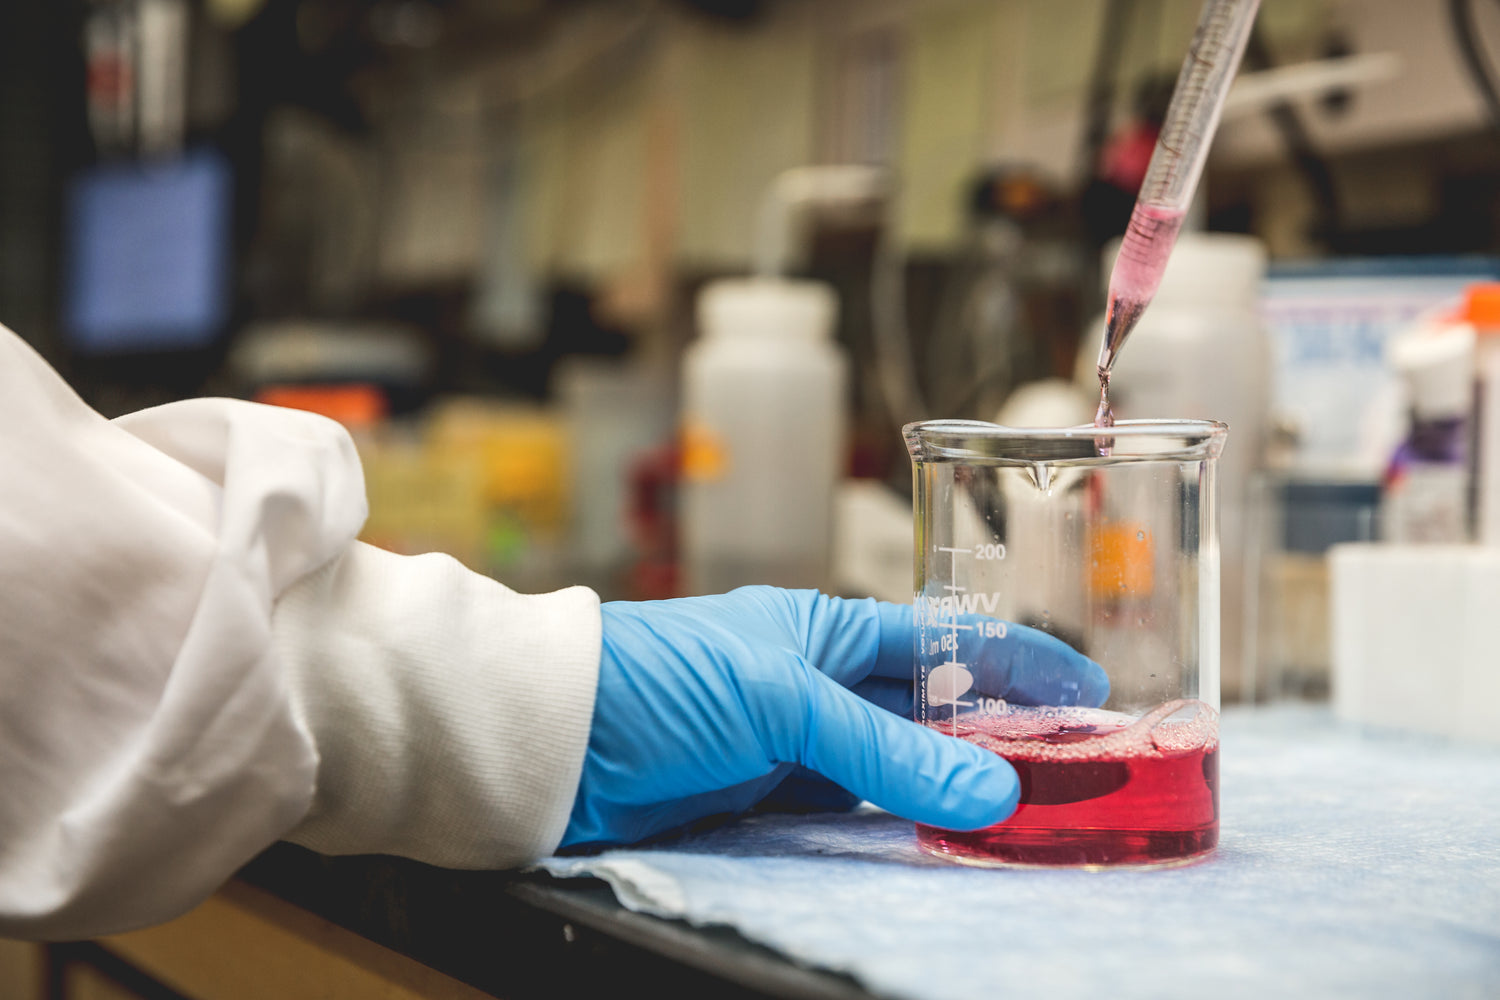 A person wearing a white lab coat and blue gloves uses a pipette to transfer a red liquid, resembling tattoo ink, into a beaker on a lab bench. The background shows various laboratory equipment and supplies.